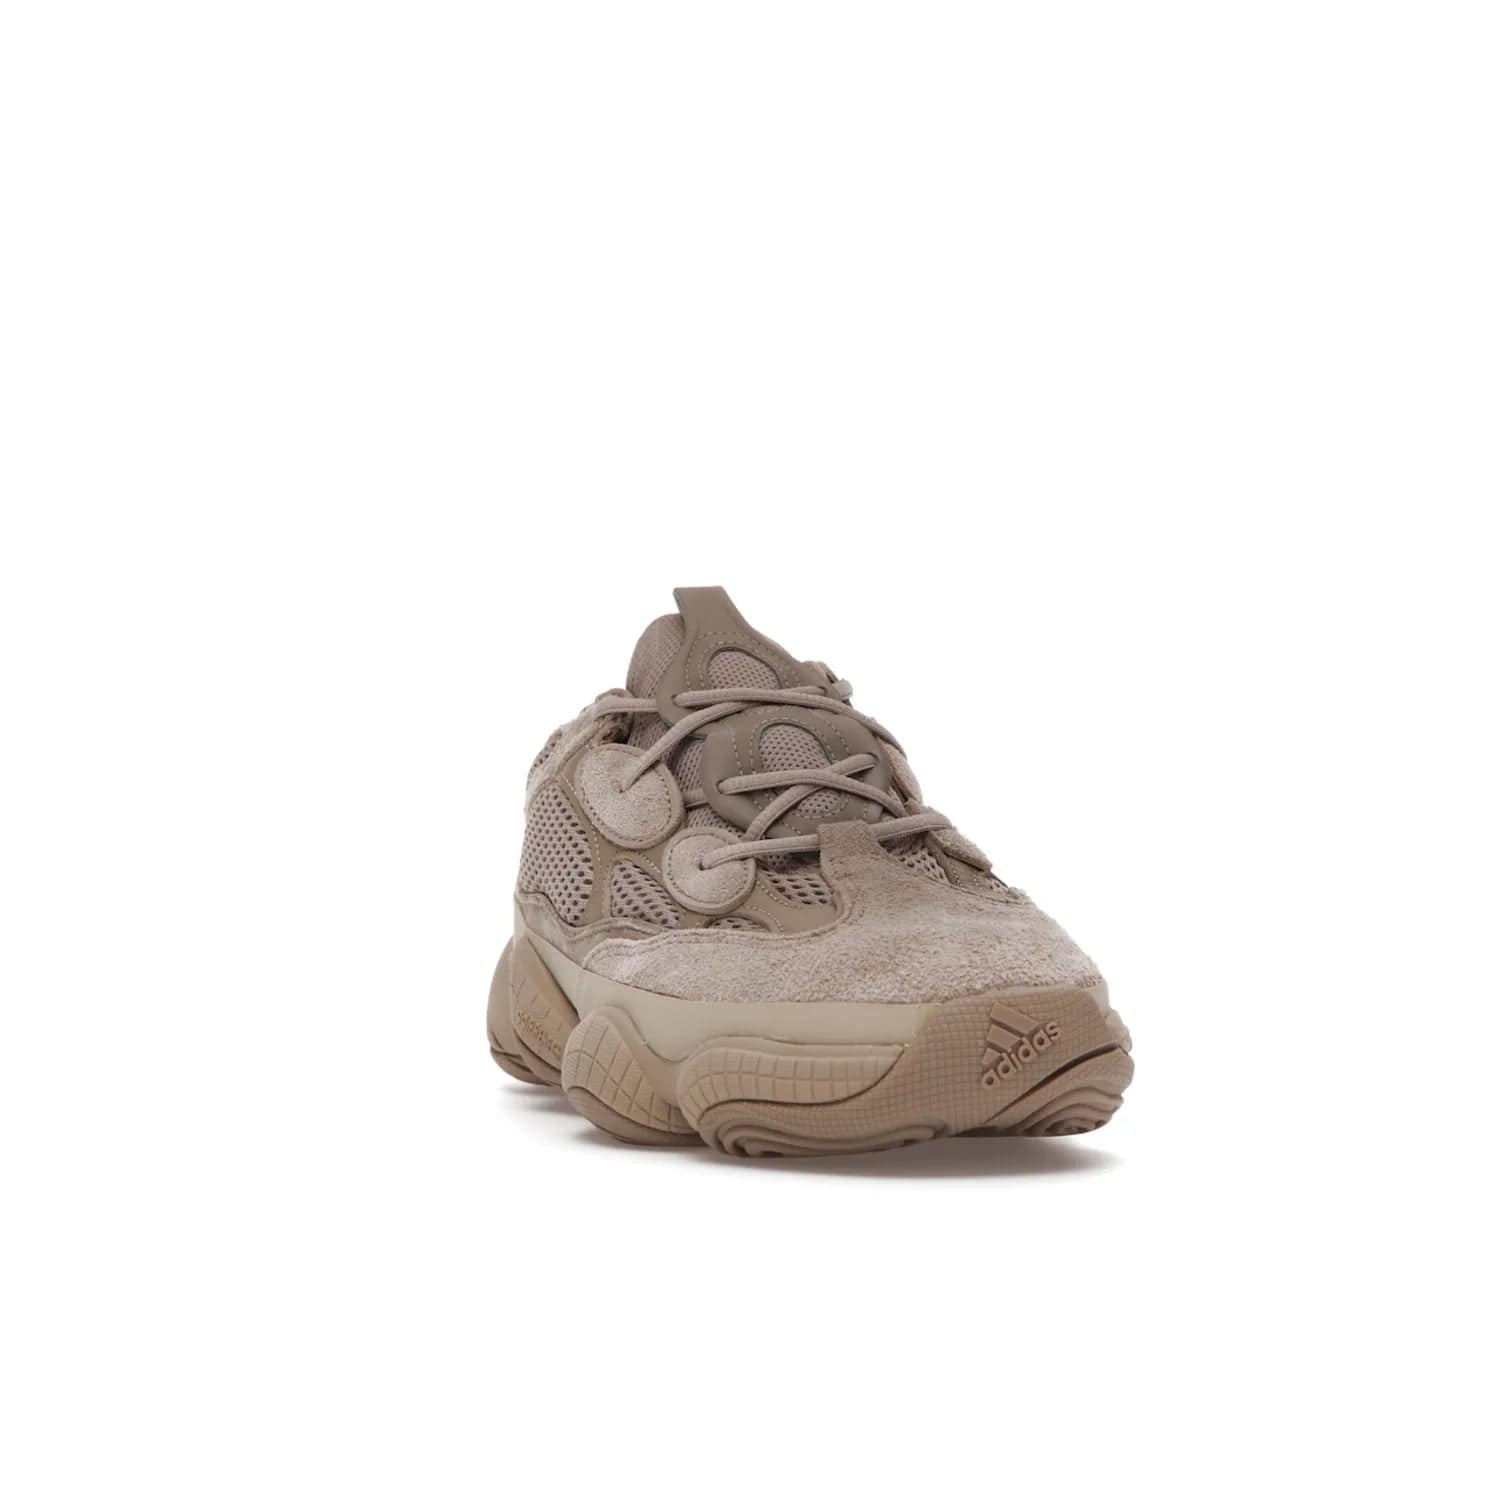 adidas Yeezy 500 Taupe Light - Image 8 - Only at www.BallersClubKickz.com - The adidas Yeezy 500 Taupe Light combines mesh, leather, and suede, with a durable adiPRENE sole for an eye-catching accessory. Reflective piping adds the perfect finishing touches to this unique silhouette. Ideal for any wardrobe, releasing in June 2021.